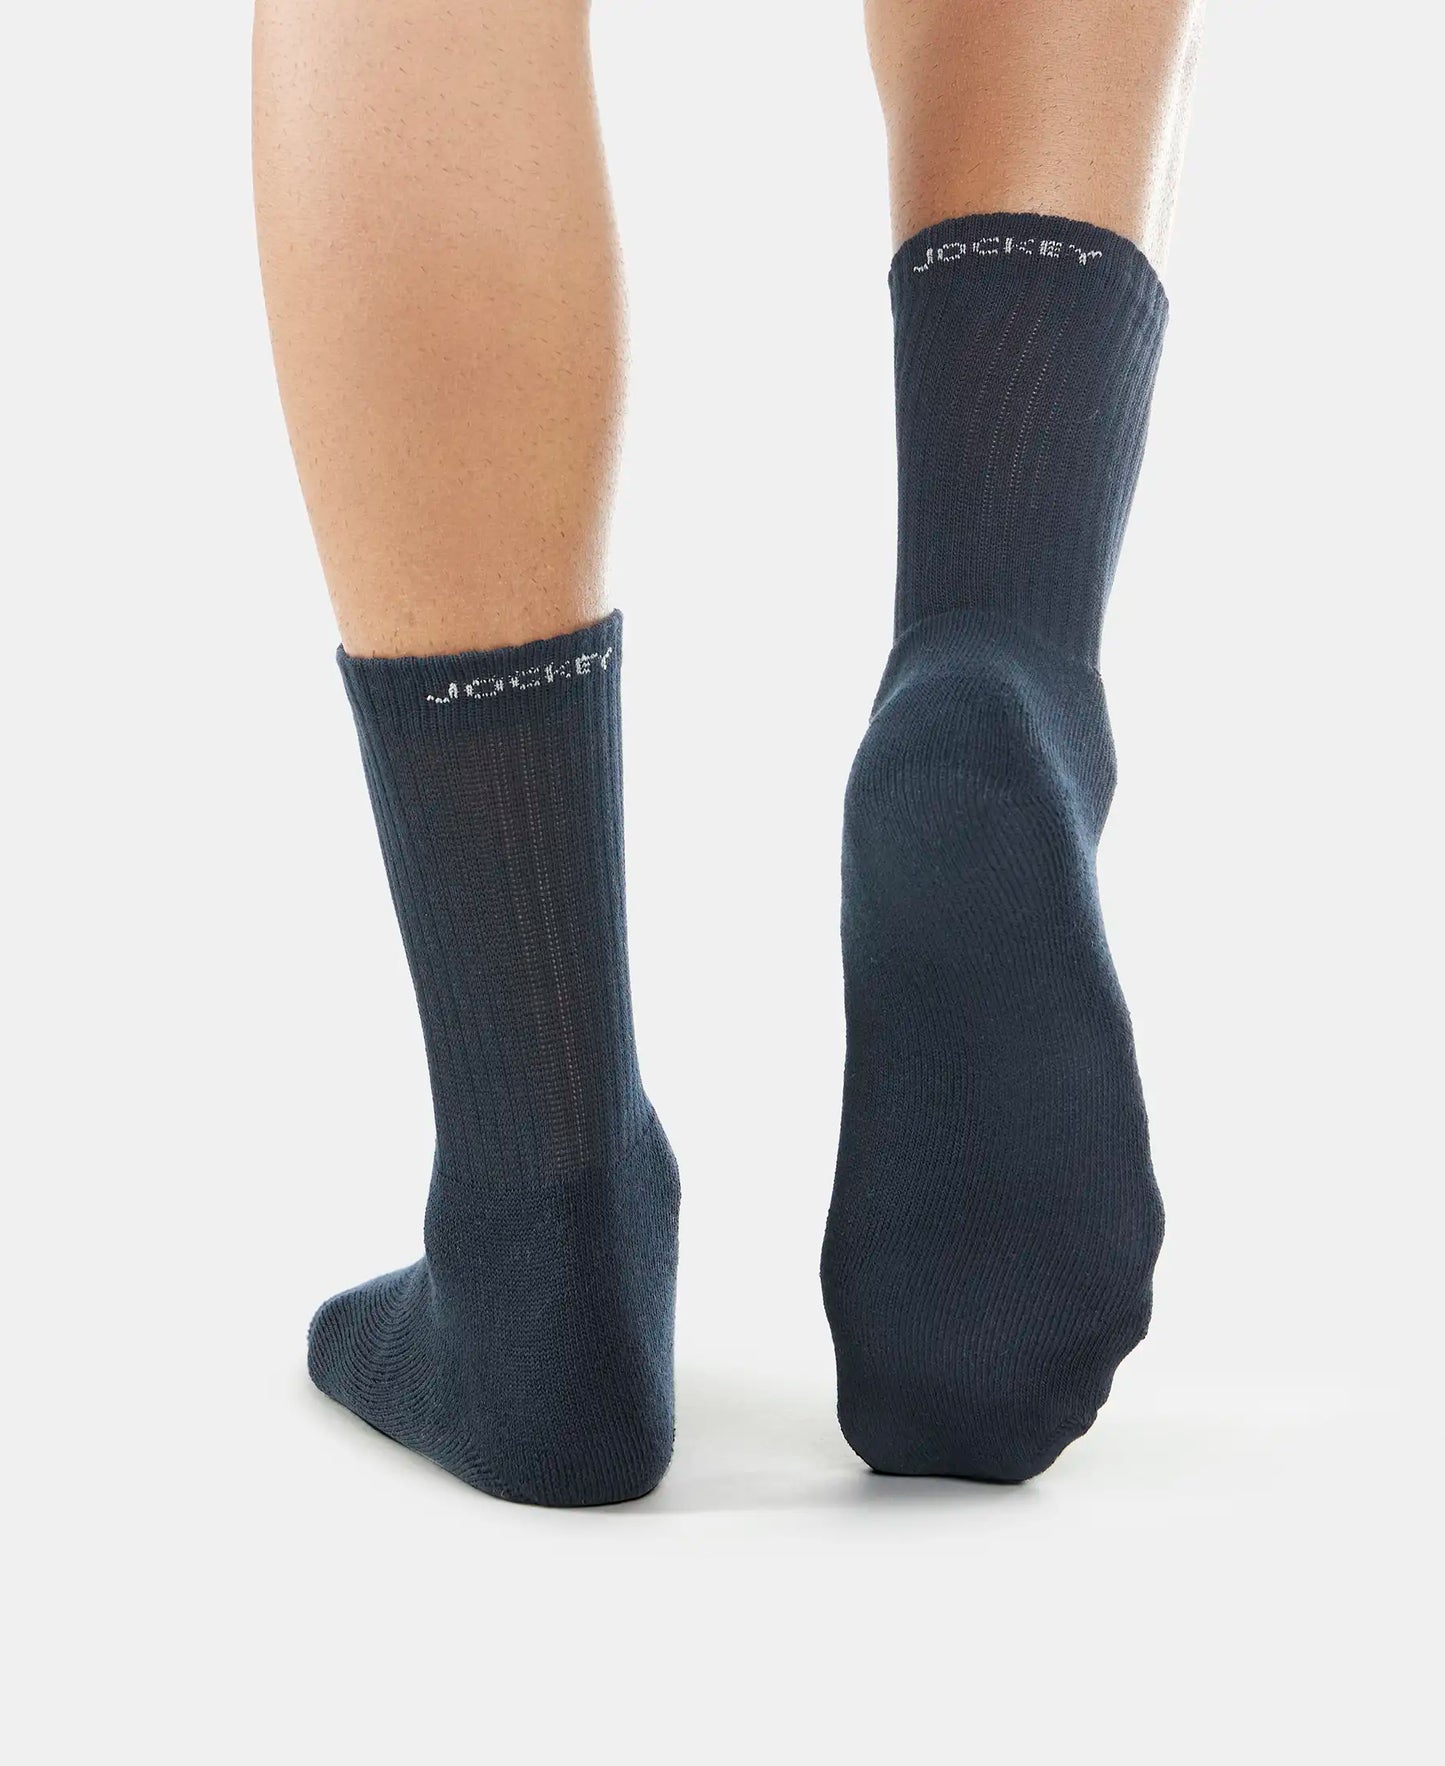 Compact Cotton Terry Crew Length Socks With StayFresh Treatment - Black/Navy/Charcoal Melange (Pack of 3)-8